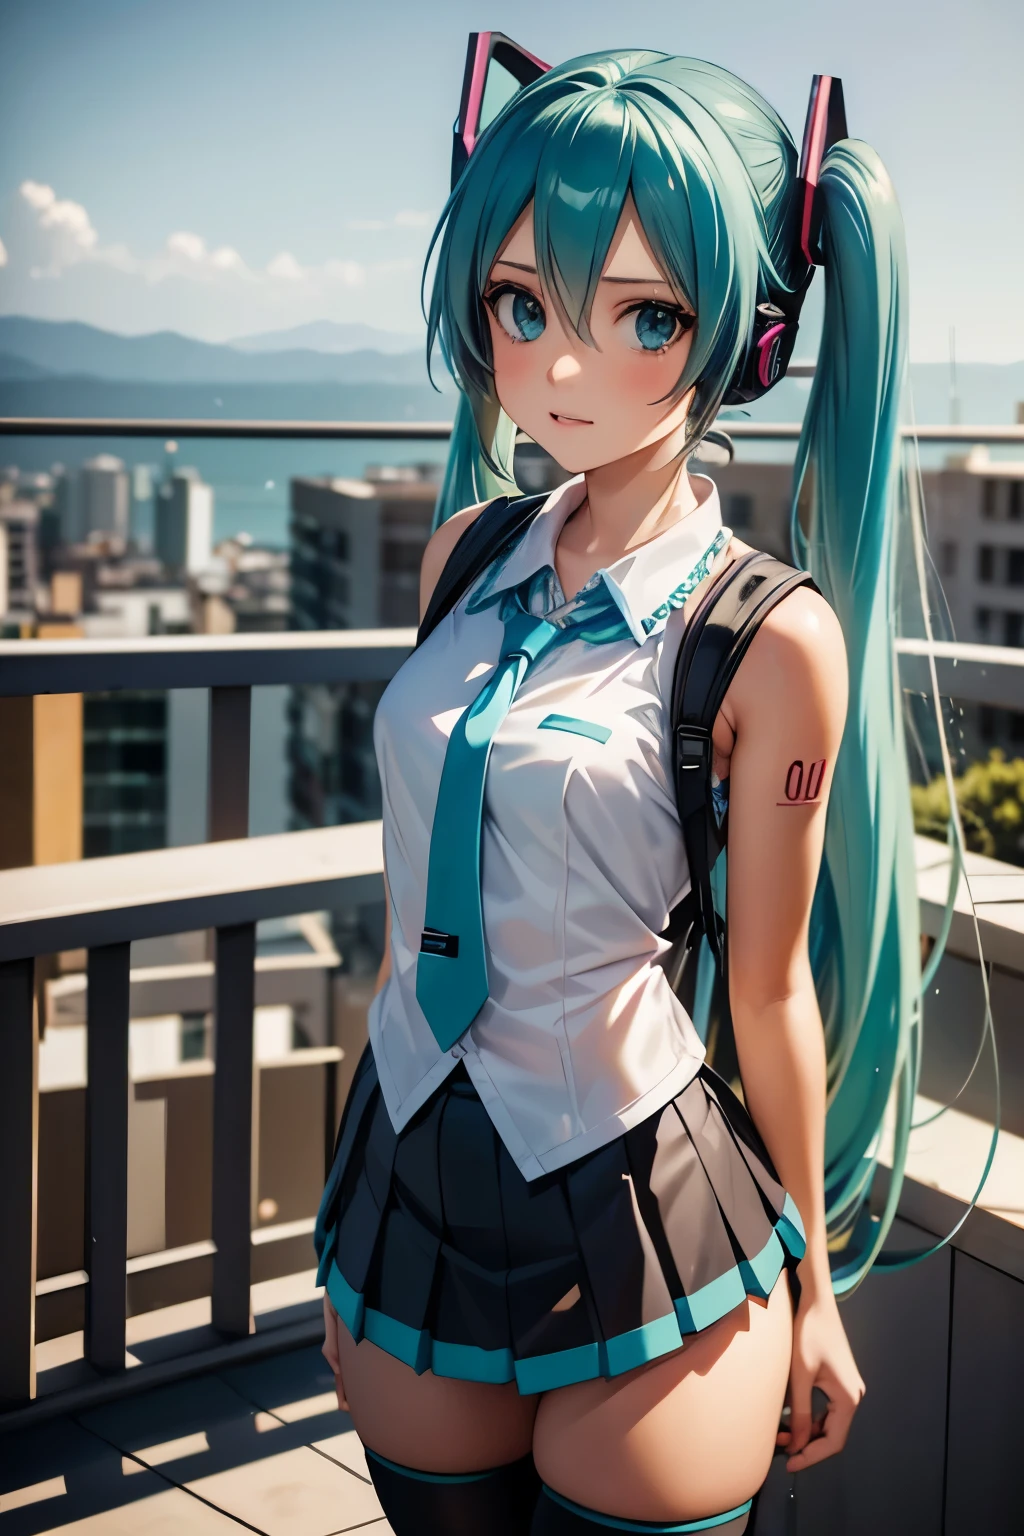 anime girl with long blue hair and a backpack standing in front of a balcony, mikudayo, anime moe artstyle, portrait of hatsune miku, anime girl with teal hair, hatsune miku short hair, anime style 4 k, hatsune miku portrait, hatsune miku, anime art wallpaper 8 k, anime wallpaper 4k, anime wallpaper 4 k, hatsune miku, 1girl, cute anime girl, turquoise blue hair, twin tails, detailed facial features, beautiful detailed eyes, beautiful detailed lips, extremely detailed face, longeyelashes, , pleated skirt, thigh-high socks, headphones, holding microphone, glowing neon sci-fi background, digital art, 8k, high resolution, photorealistic, cinematic lighting, vibrant colors, intricate details